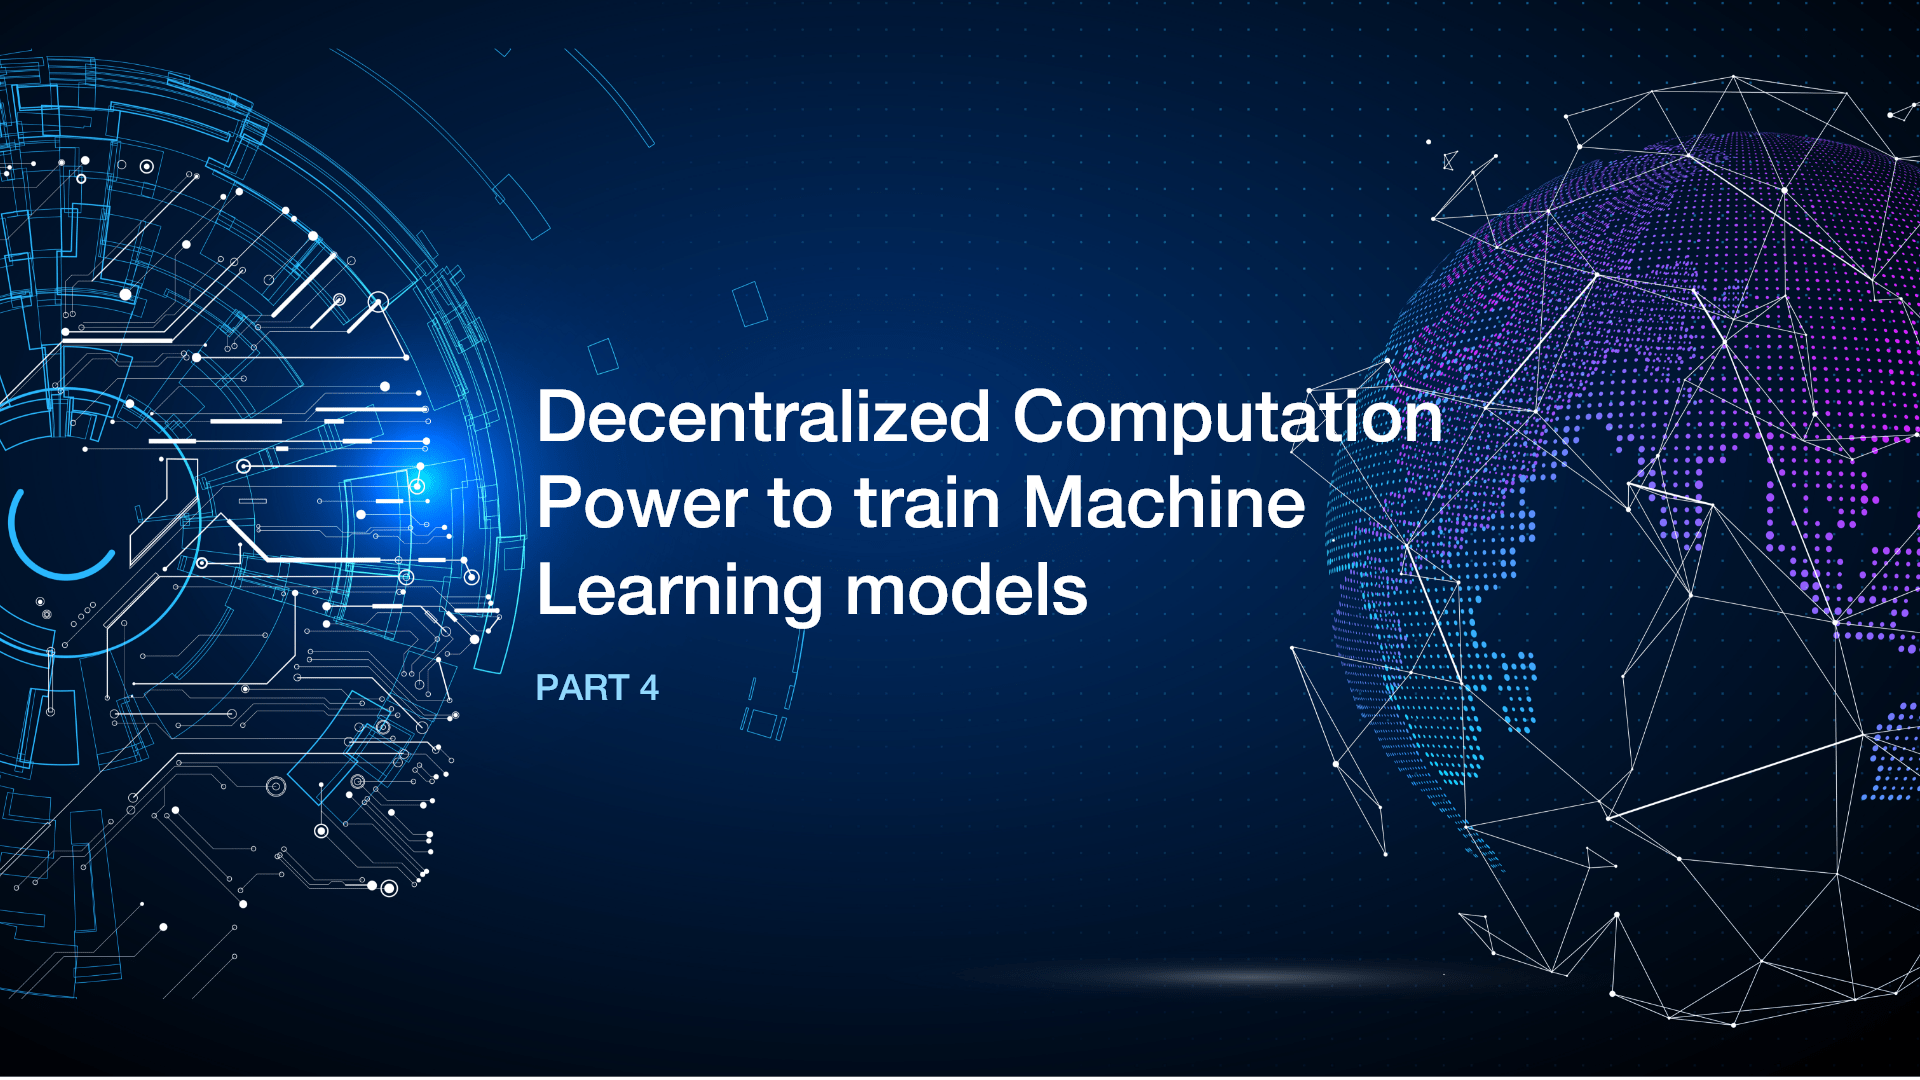 Decentralized Computation Power to train Machine Learning Model - Part 4